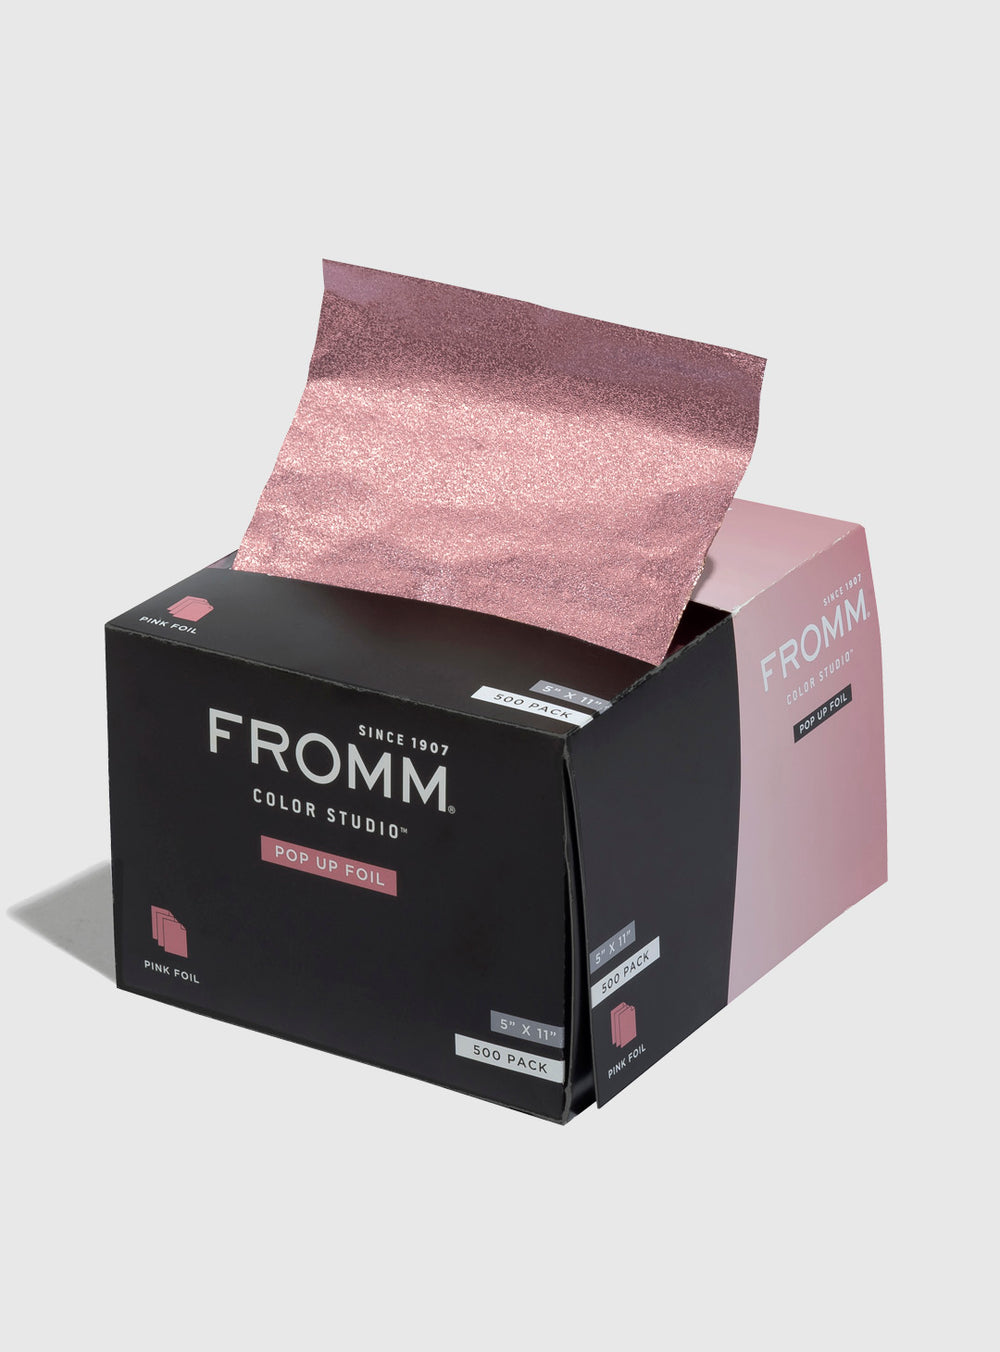 Fromm Pop Up Foil 5 in x 11 inch 500 CountHair Color AccessoriesFROMMColor: Pink